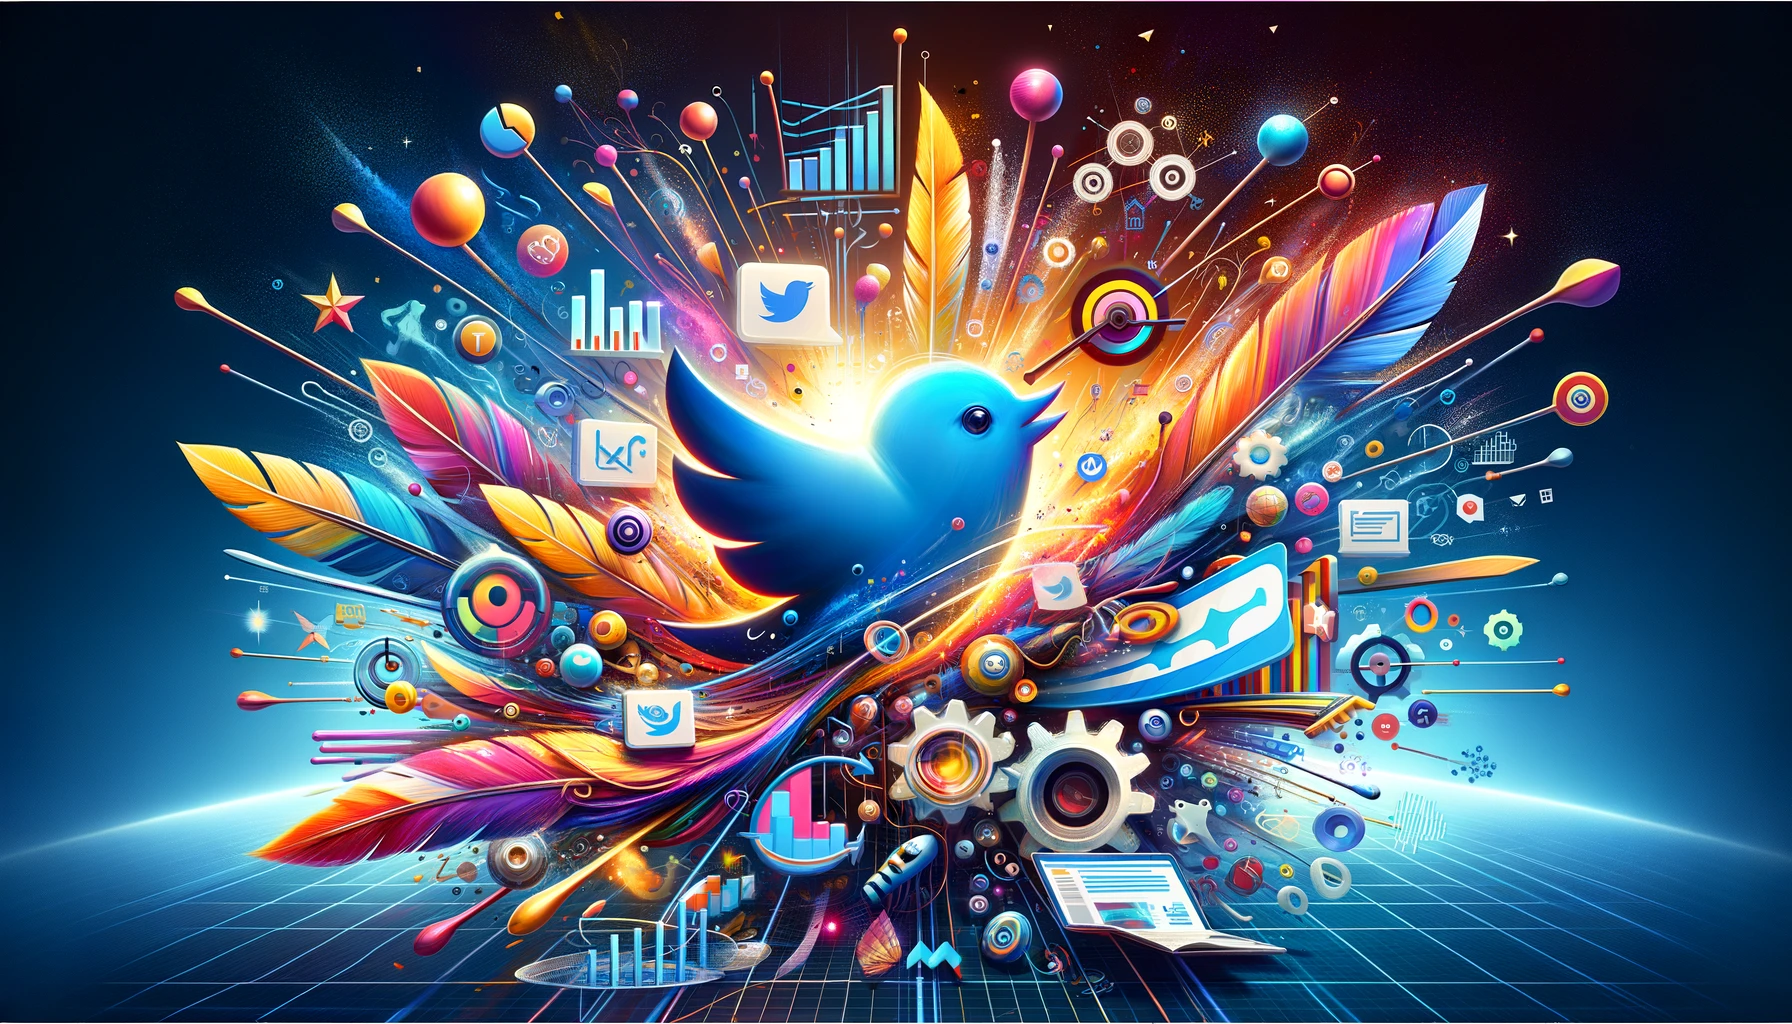 Abstract visual representation of optimizing Twitter ad budget featuring symbolic elements like a bird, graphs, charts, and gears in a dynamic and colorful setting.